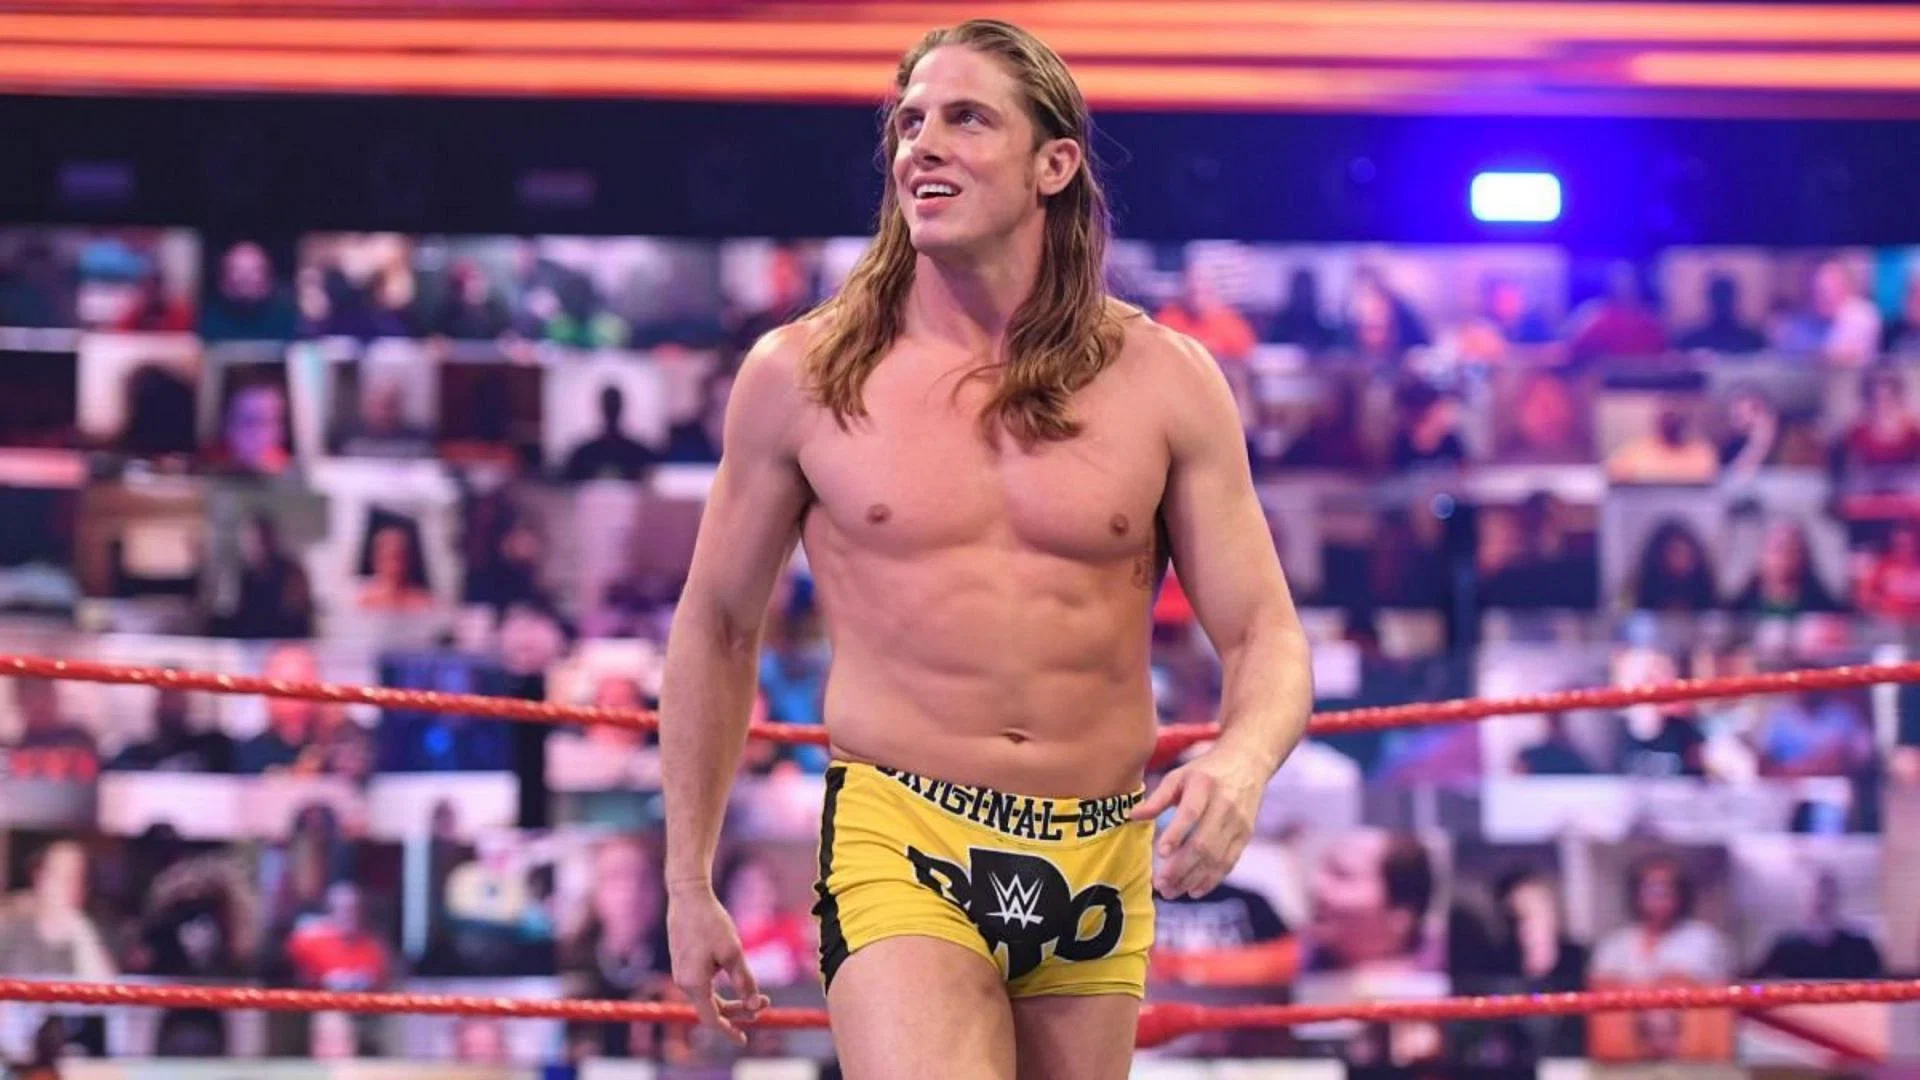 Matt Riddle Triumphs Wins World Title and Sets Stage for Epic Showdown with Austin Aries